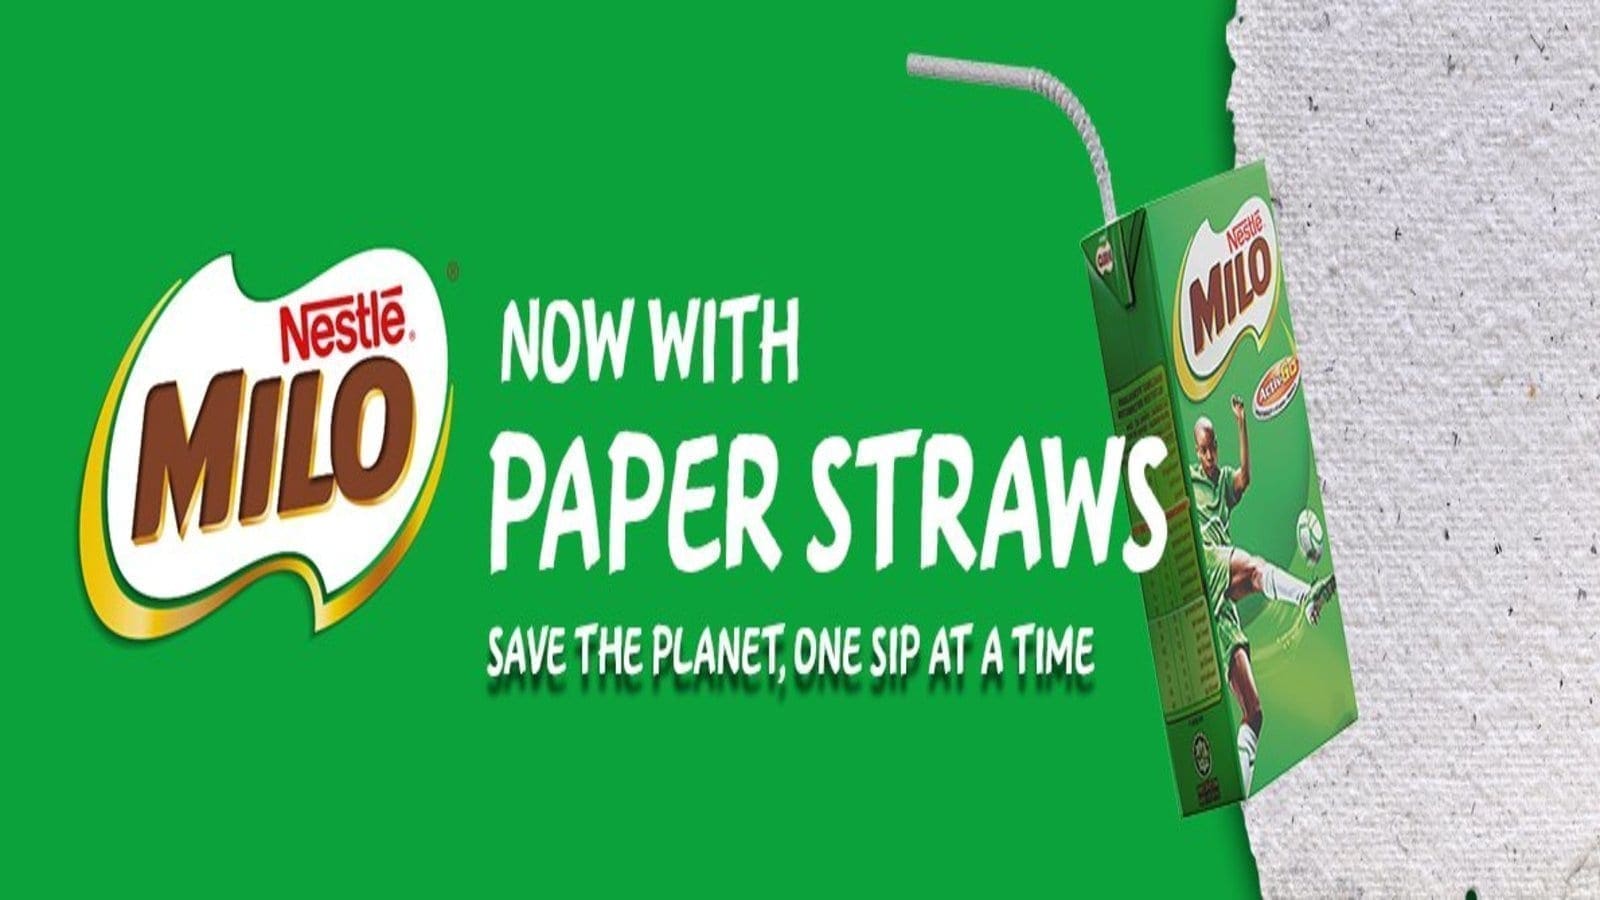 Nestle Nigeria introduces paper straws for MILO Ready-To-Drink promoting a circular economy